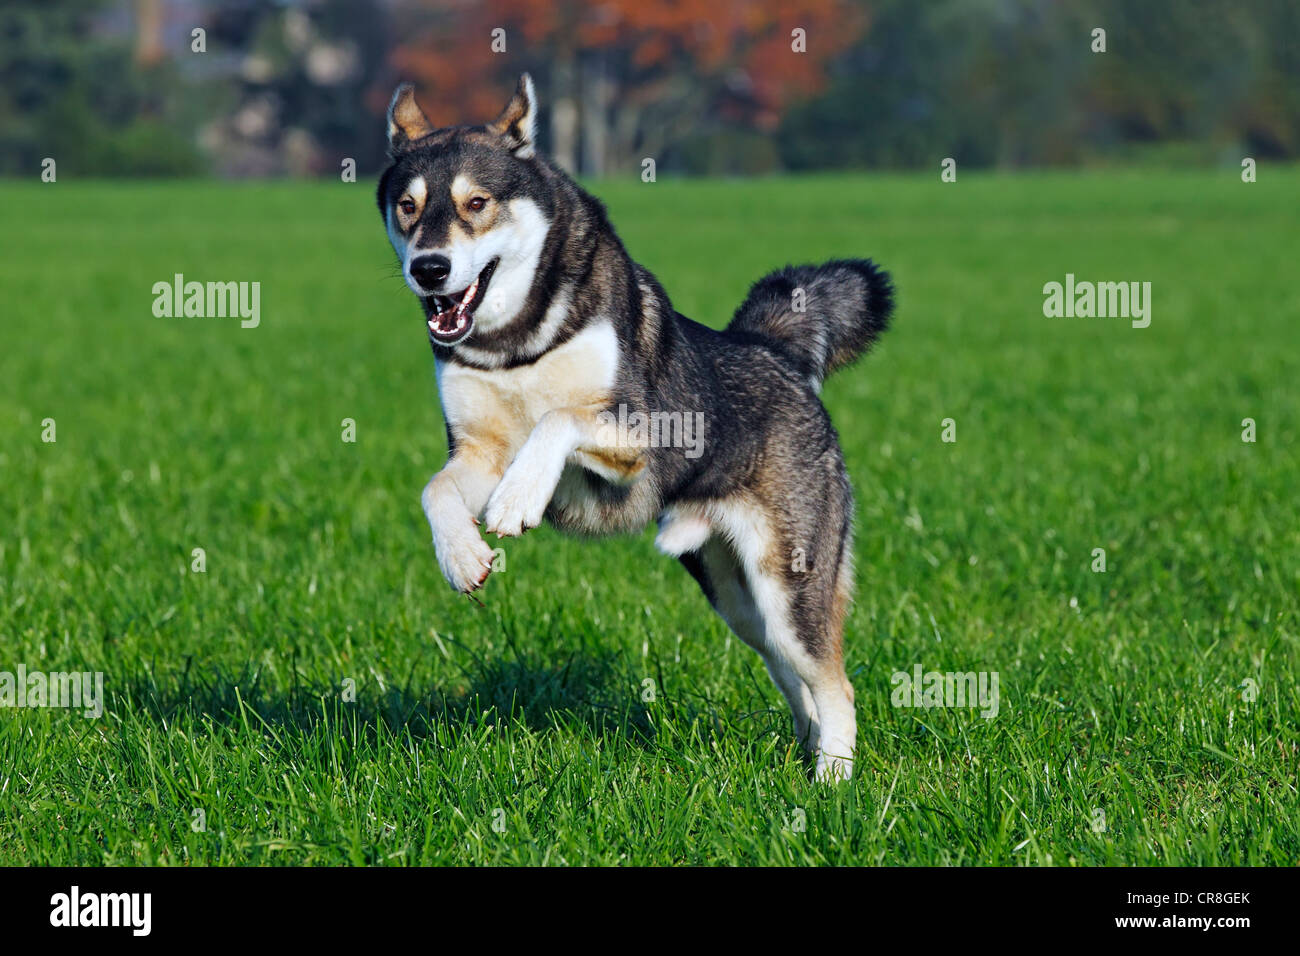 Running young Siberian Husky dog (Canis lupus familiaris) male, domestic dog Stock Photo